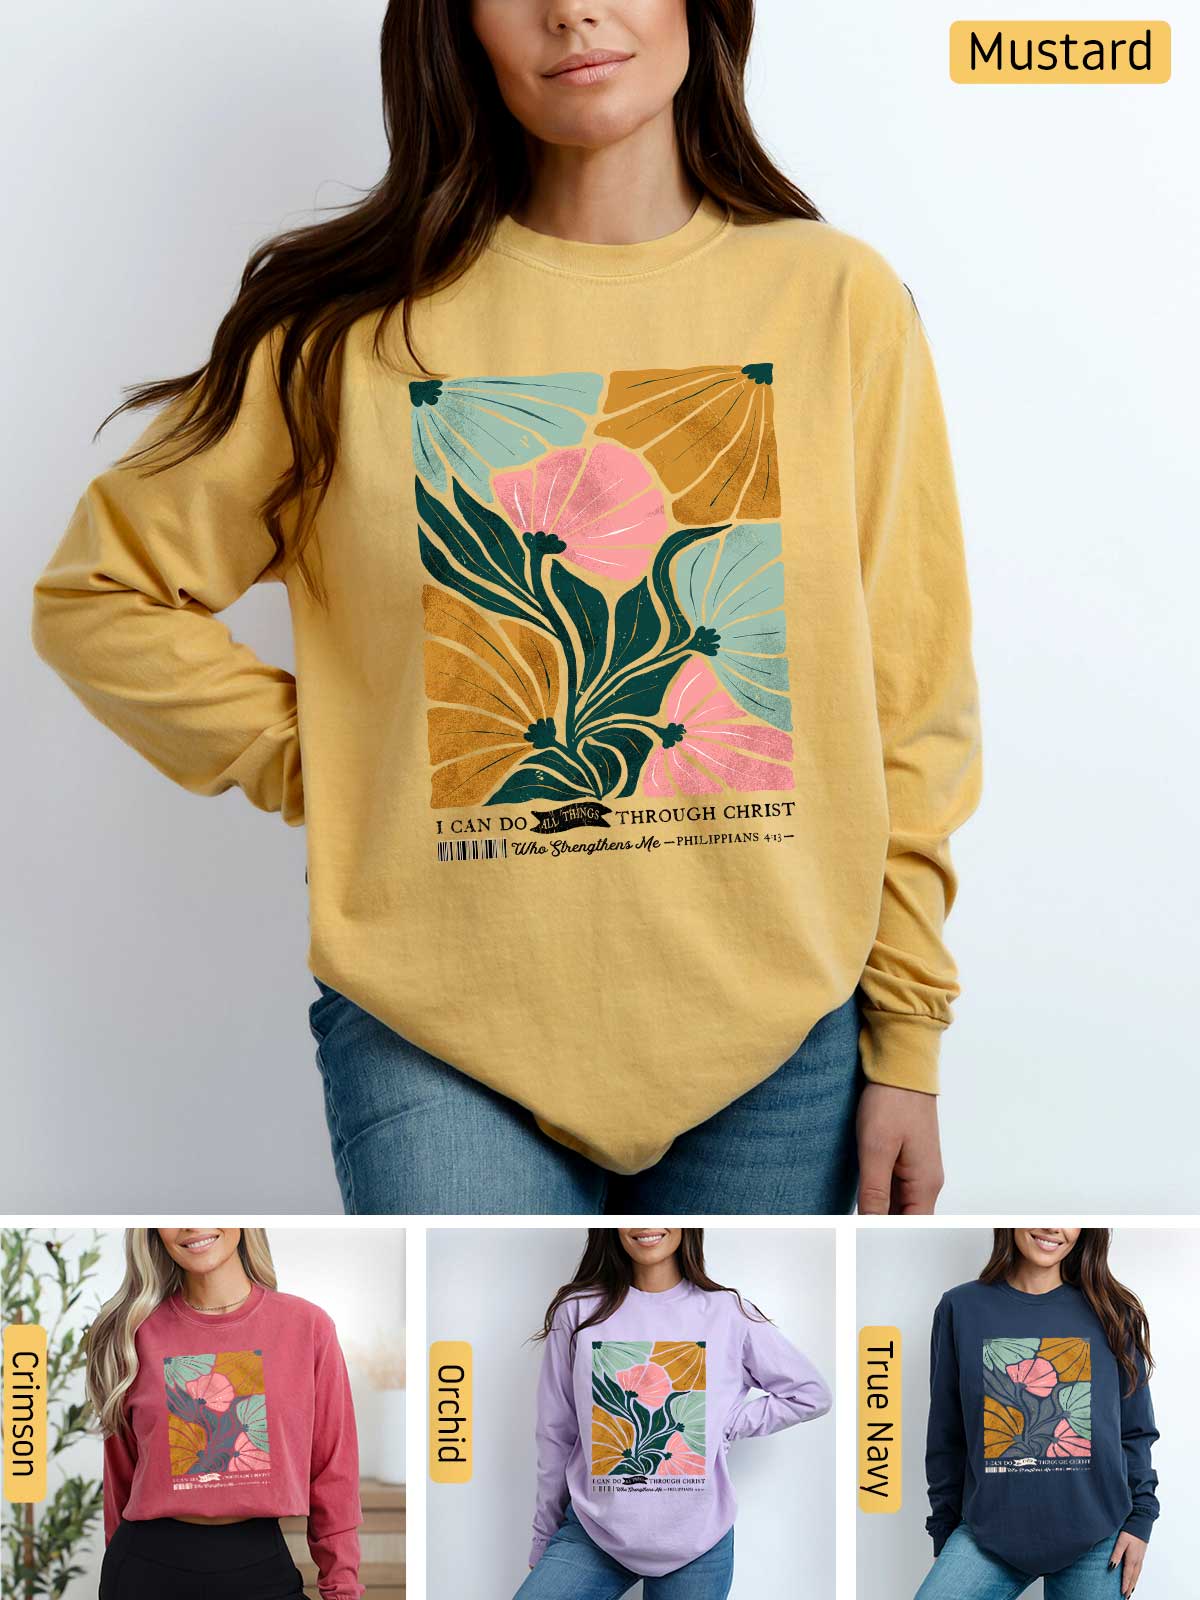 a woman wearing a mustard colored sweatshirt with a flower on it